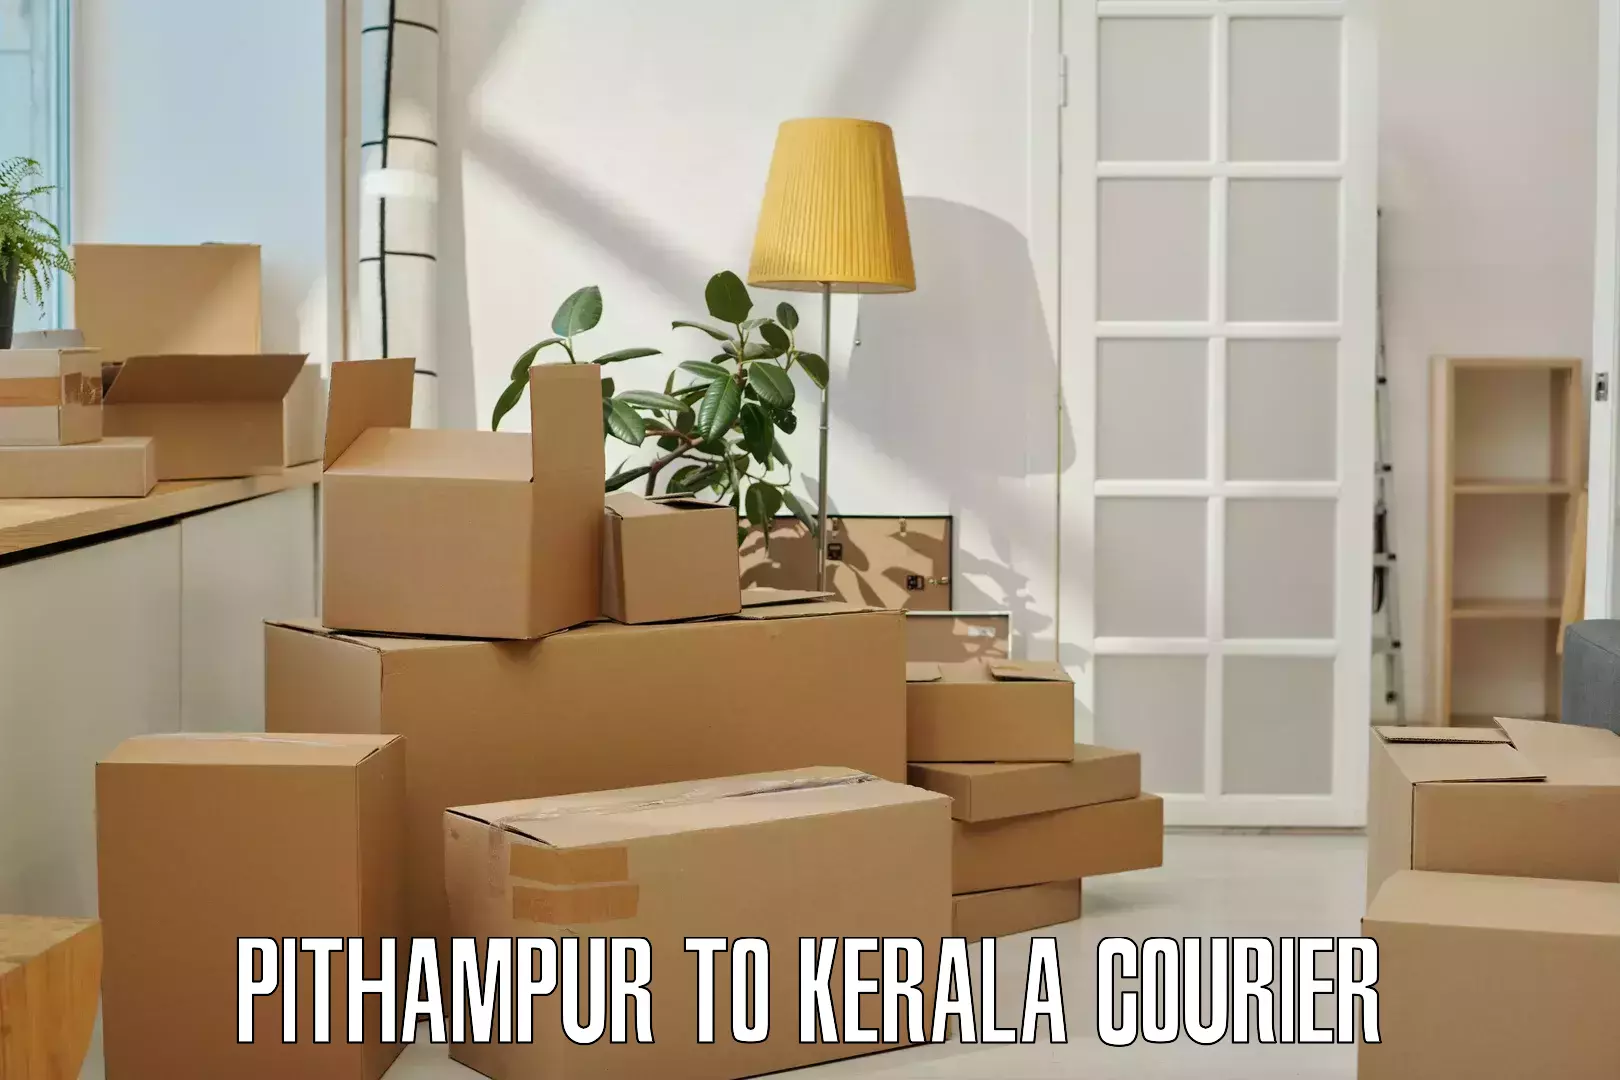 Bulk courier orders in Pithampur to Kerala